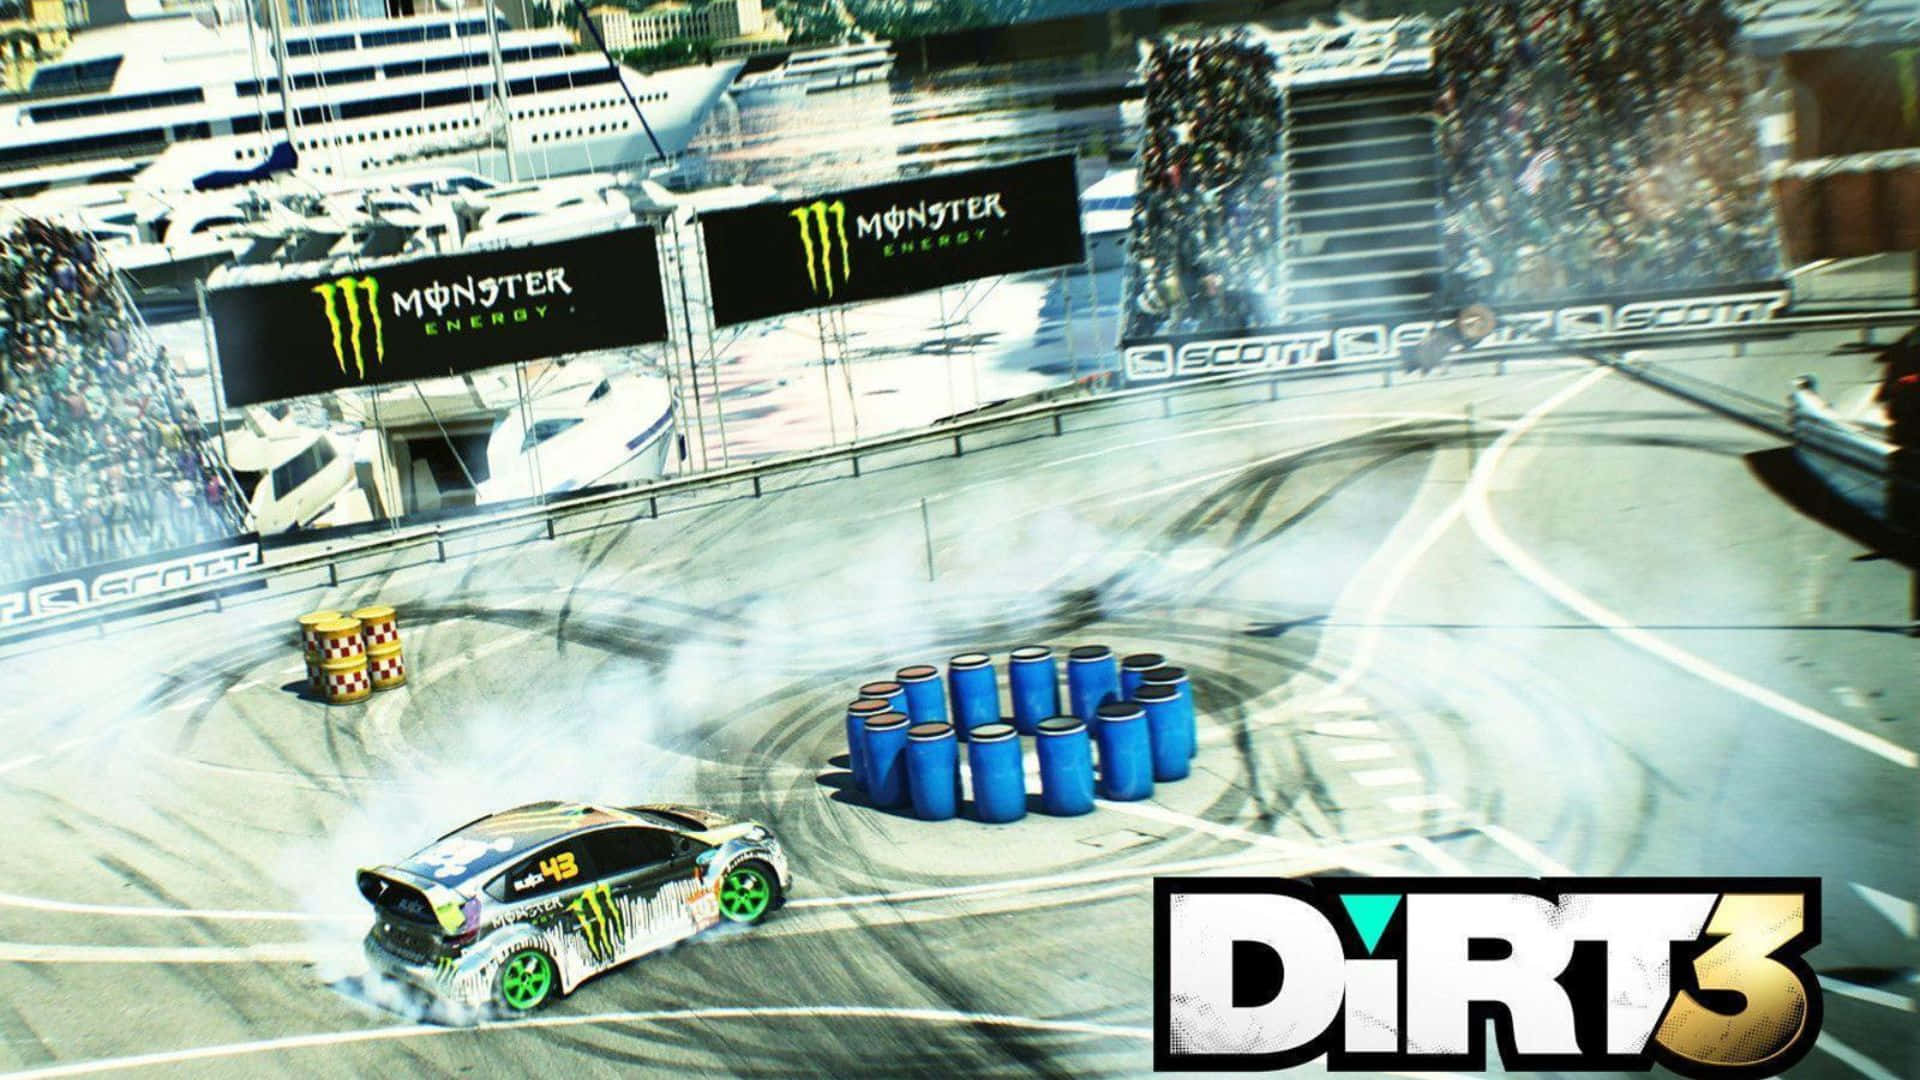 "Join the Thrill of High-Octane Rally Racing with Dirt 3 at 1080p!"